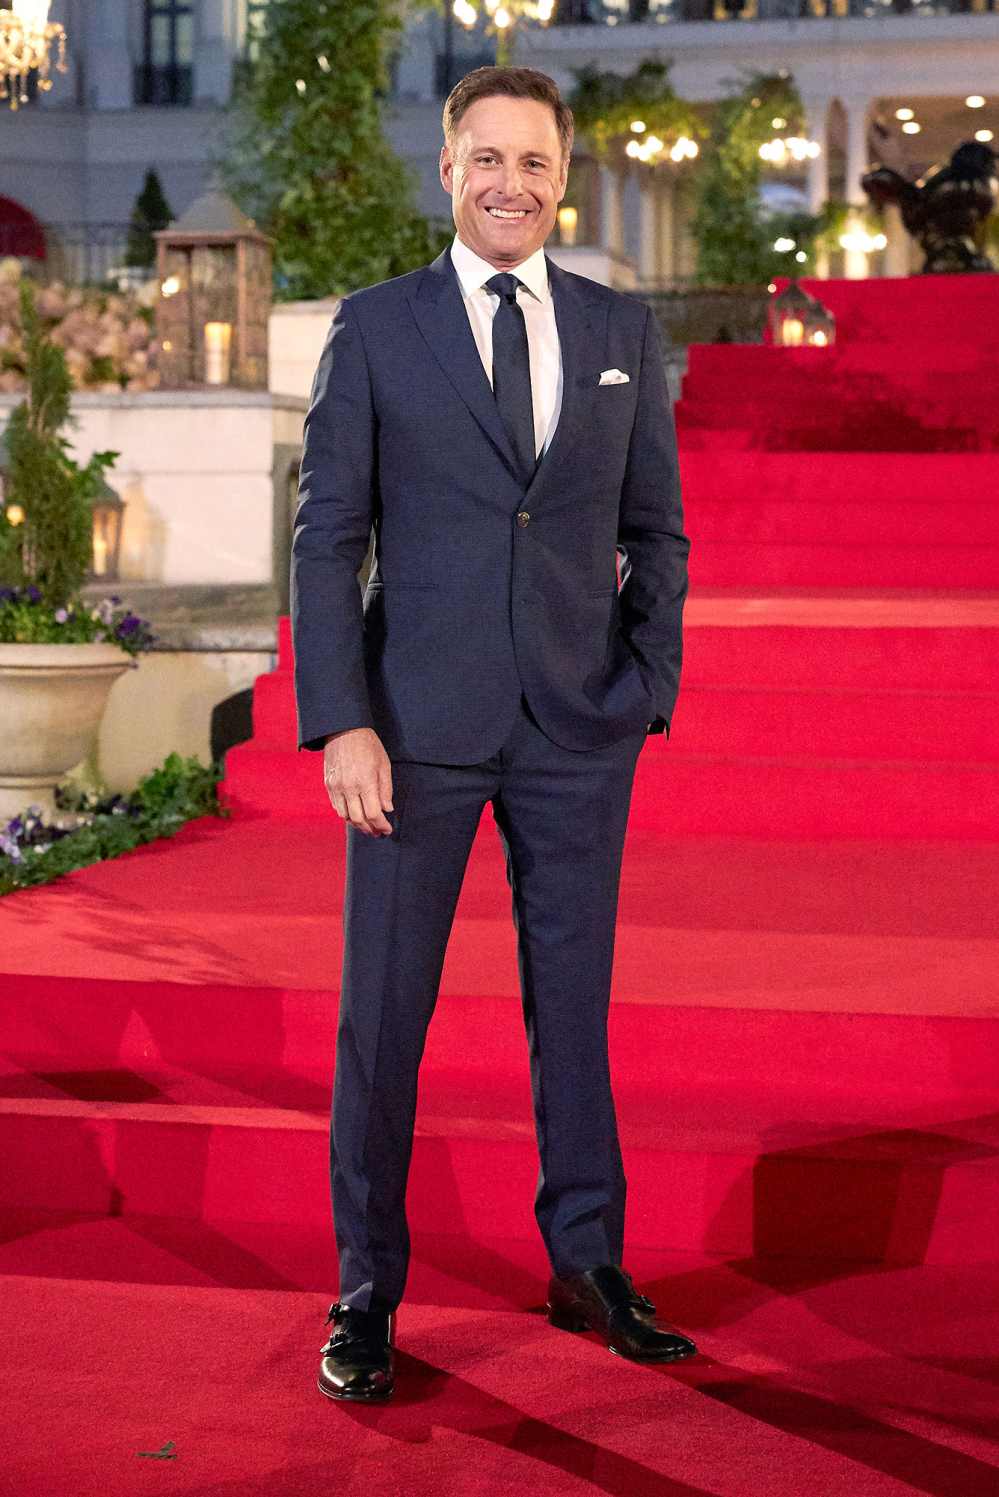 Chris Harrison May Be Cut From Remaining Bachelor Episodes